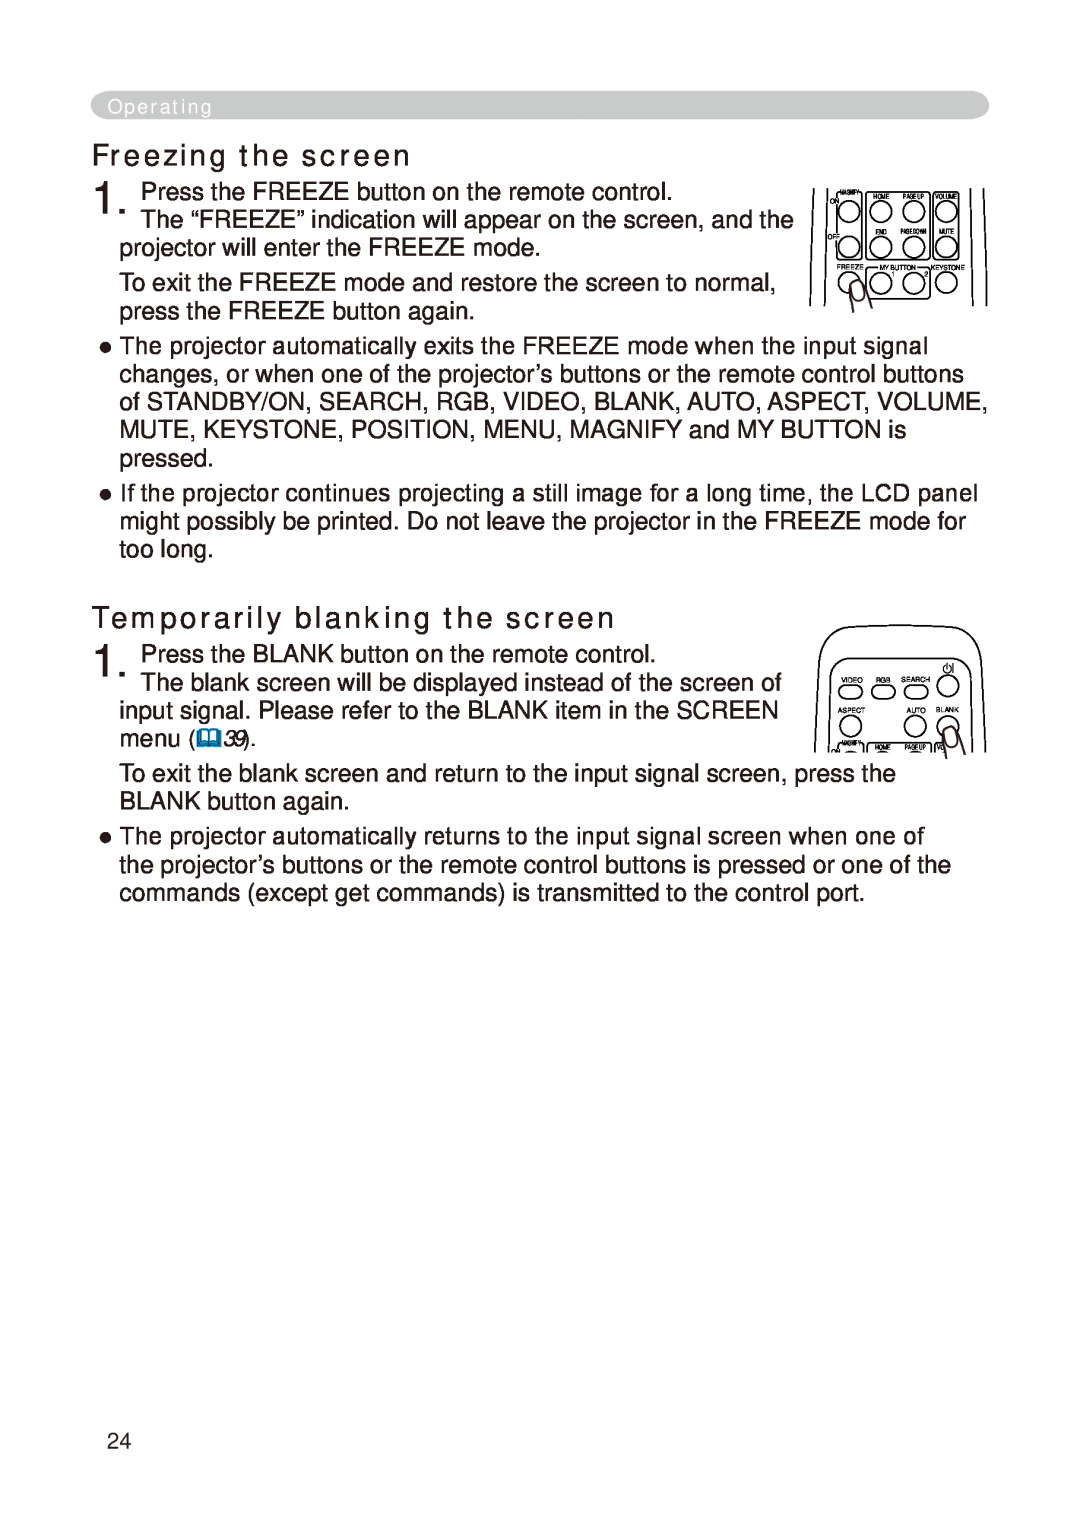 Hitachi CP-X268A user manual Freezing the screen, Temporarily blanking the screen 